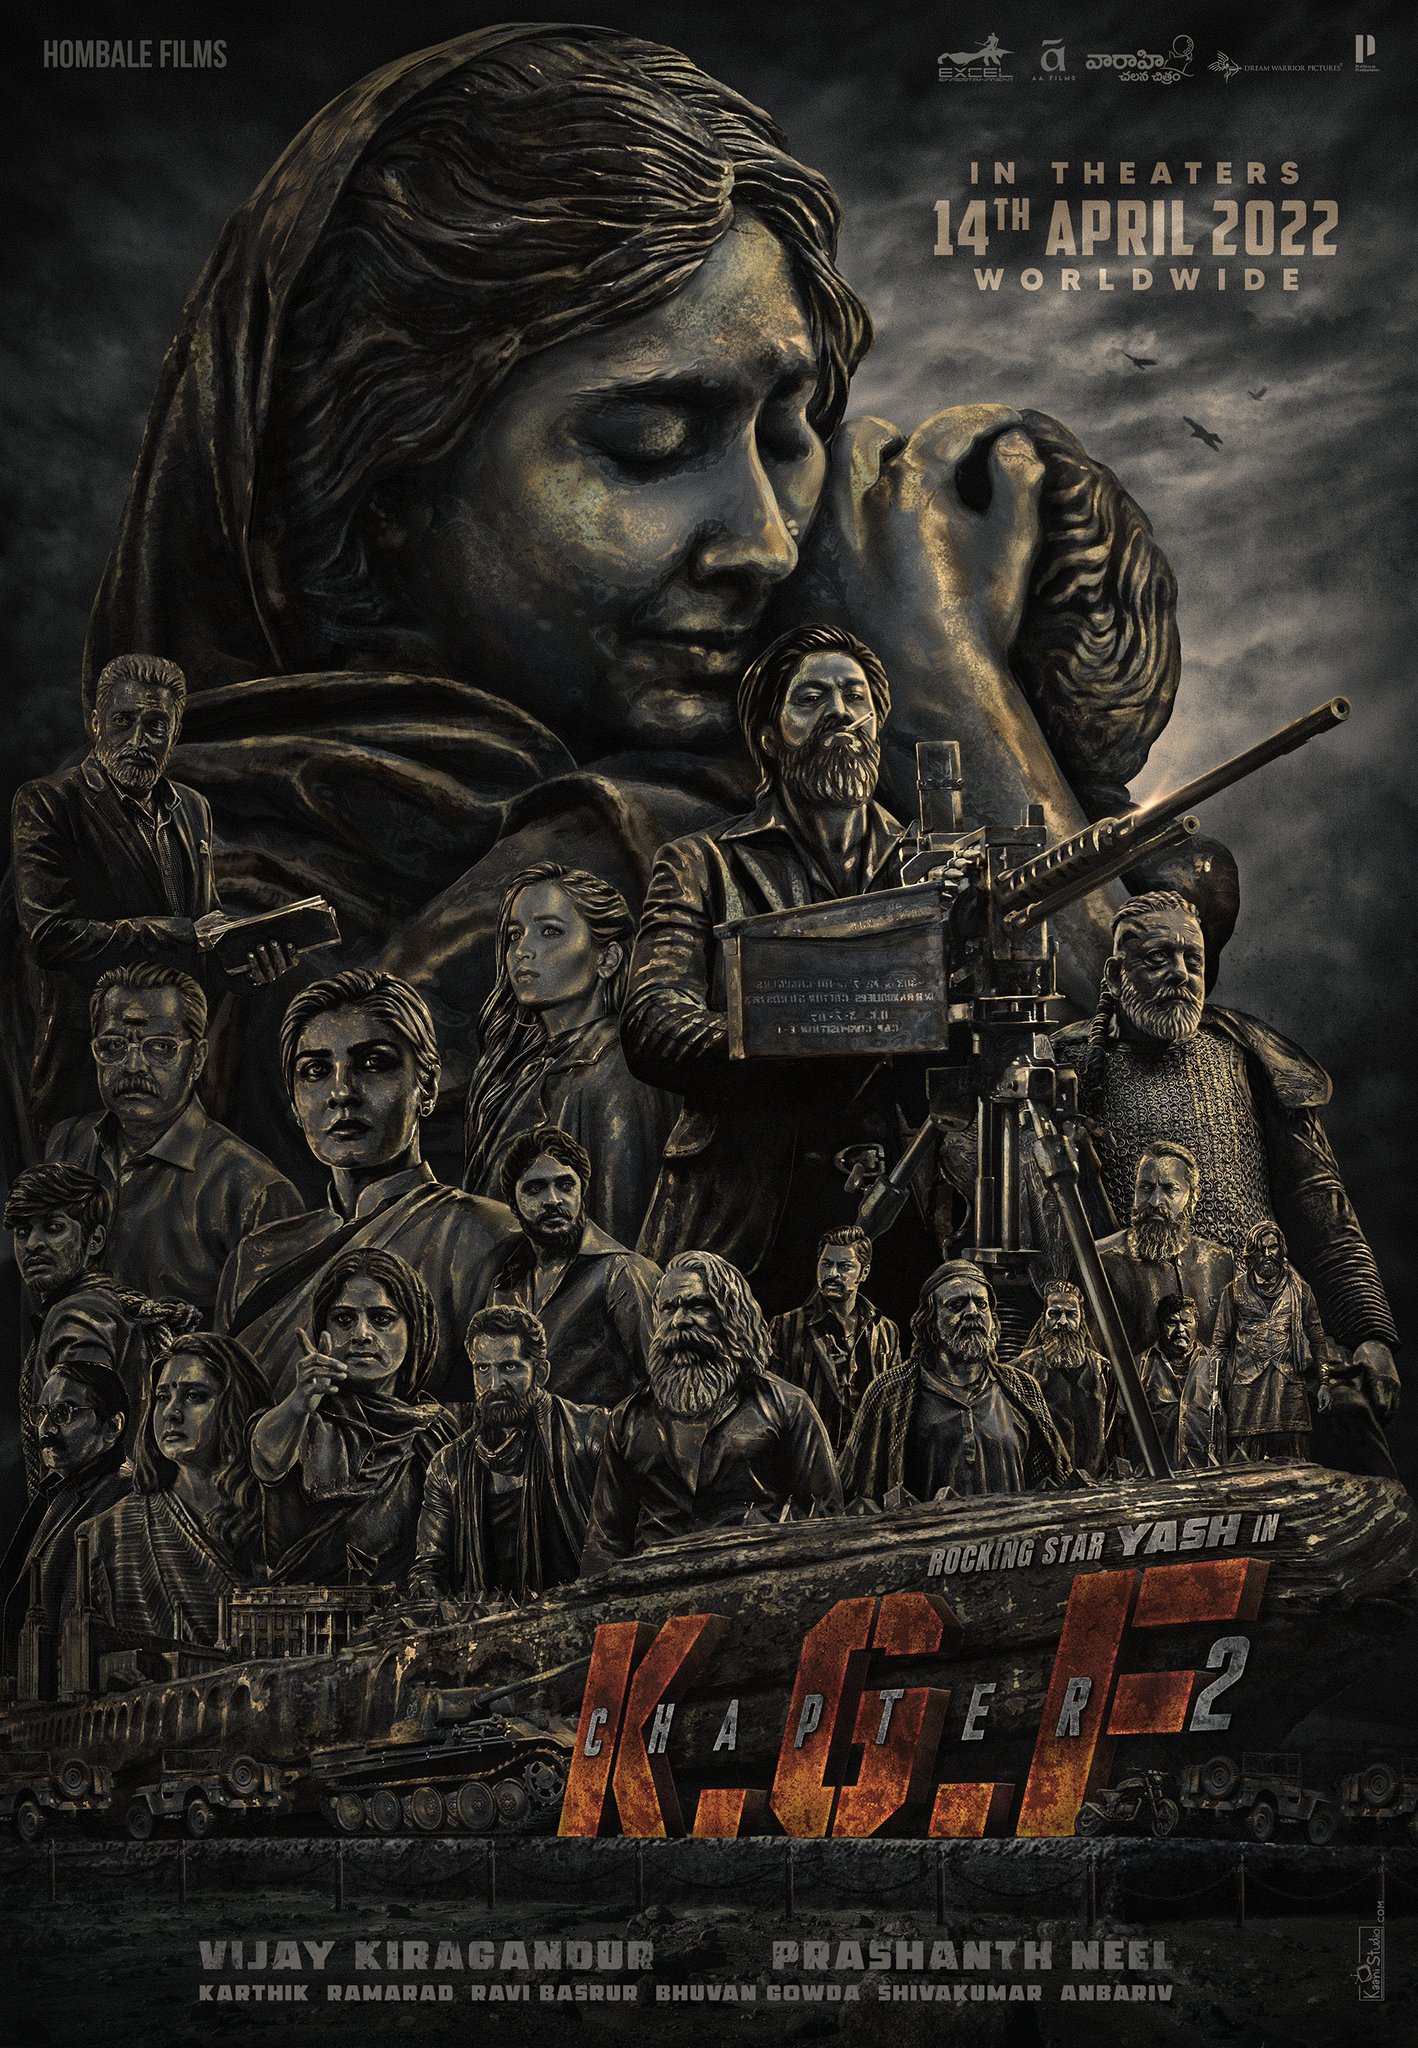 K.G.F- Chapter 2 is an upcoming South Indian movie